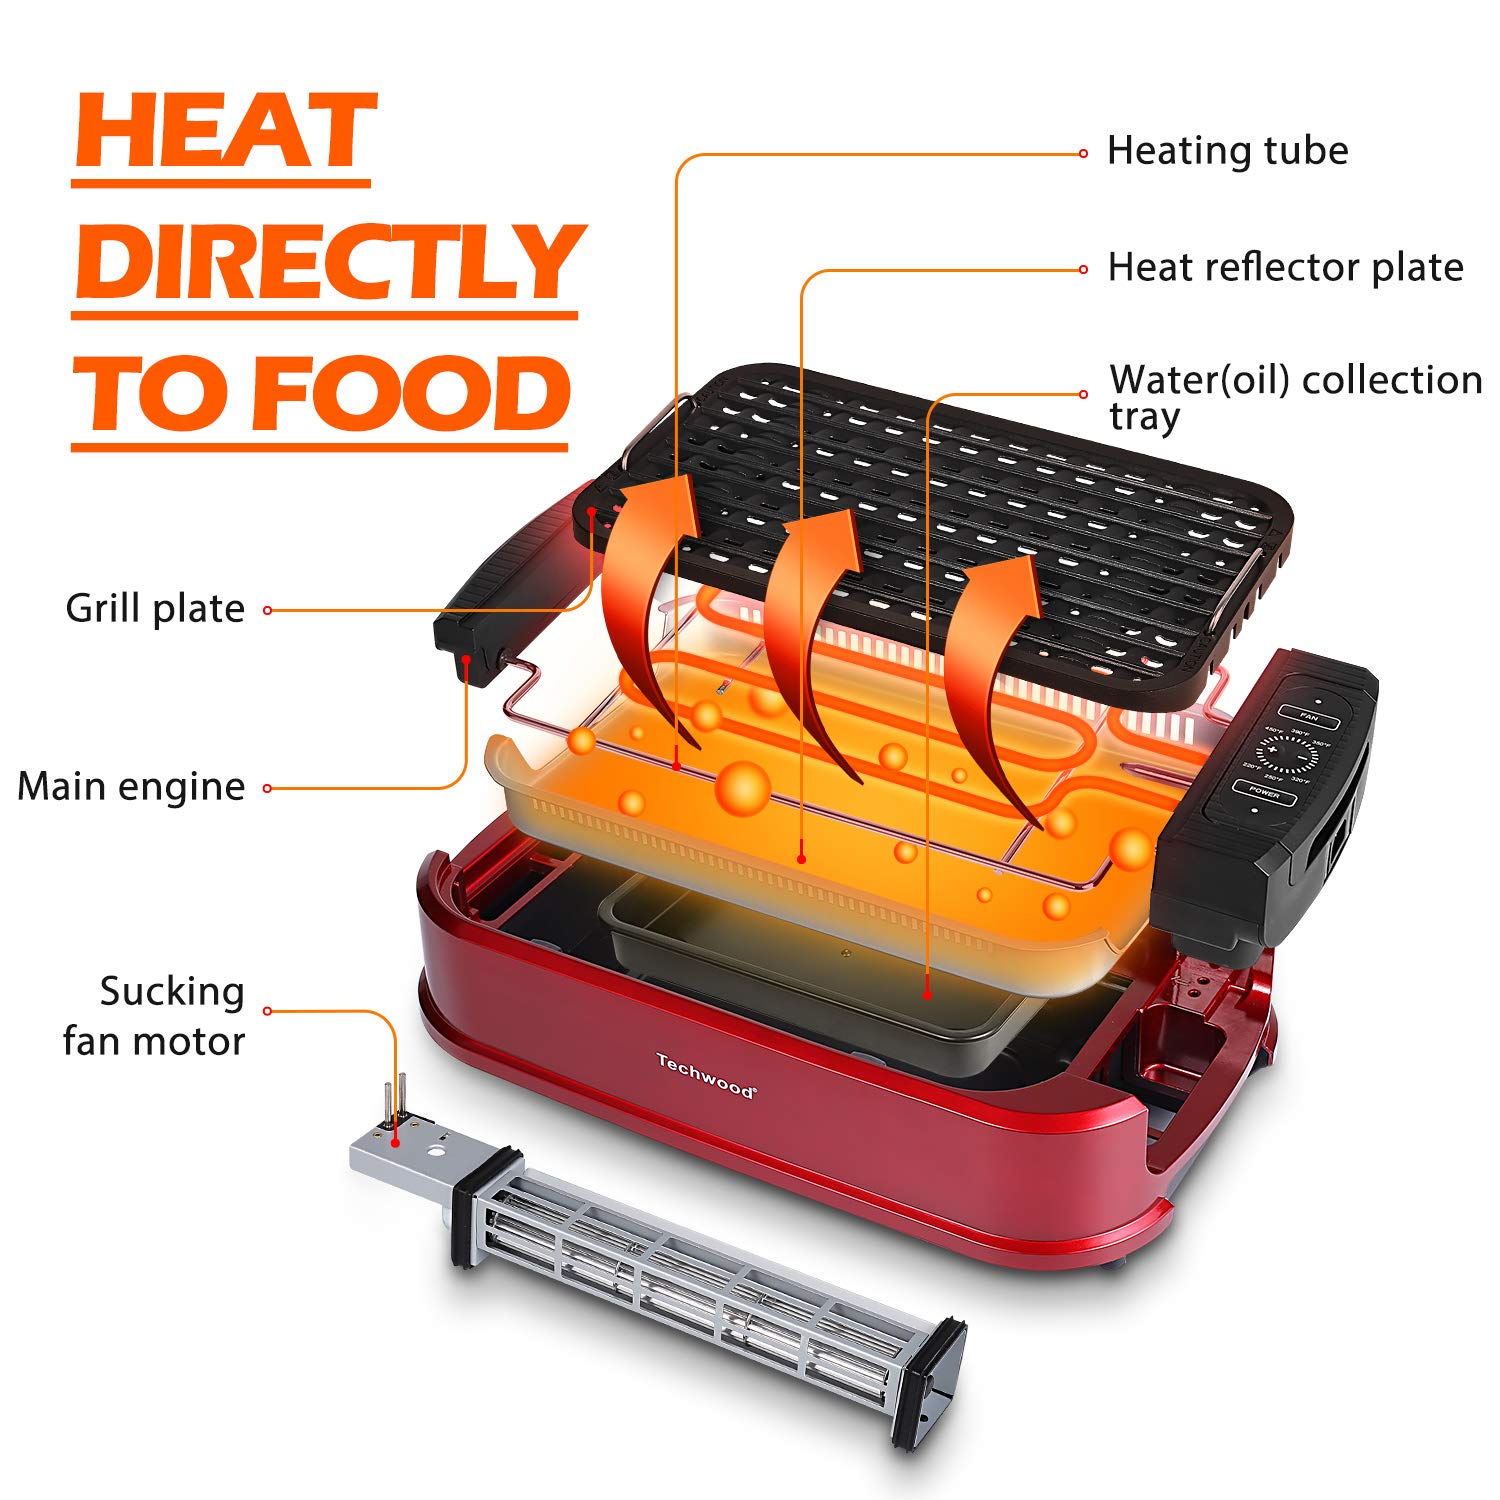 Smokeless Indoor Grill, Techwood 1500W Electric Grill Portable Korean Grill  Non-Stick Grill Plates with Temperature Control, Removable Drip Tray